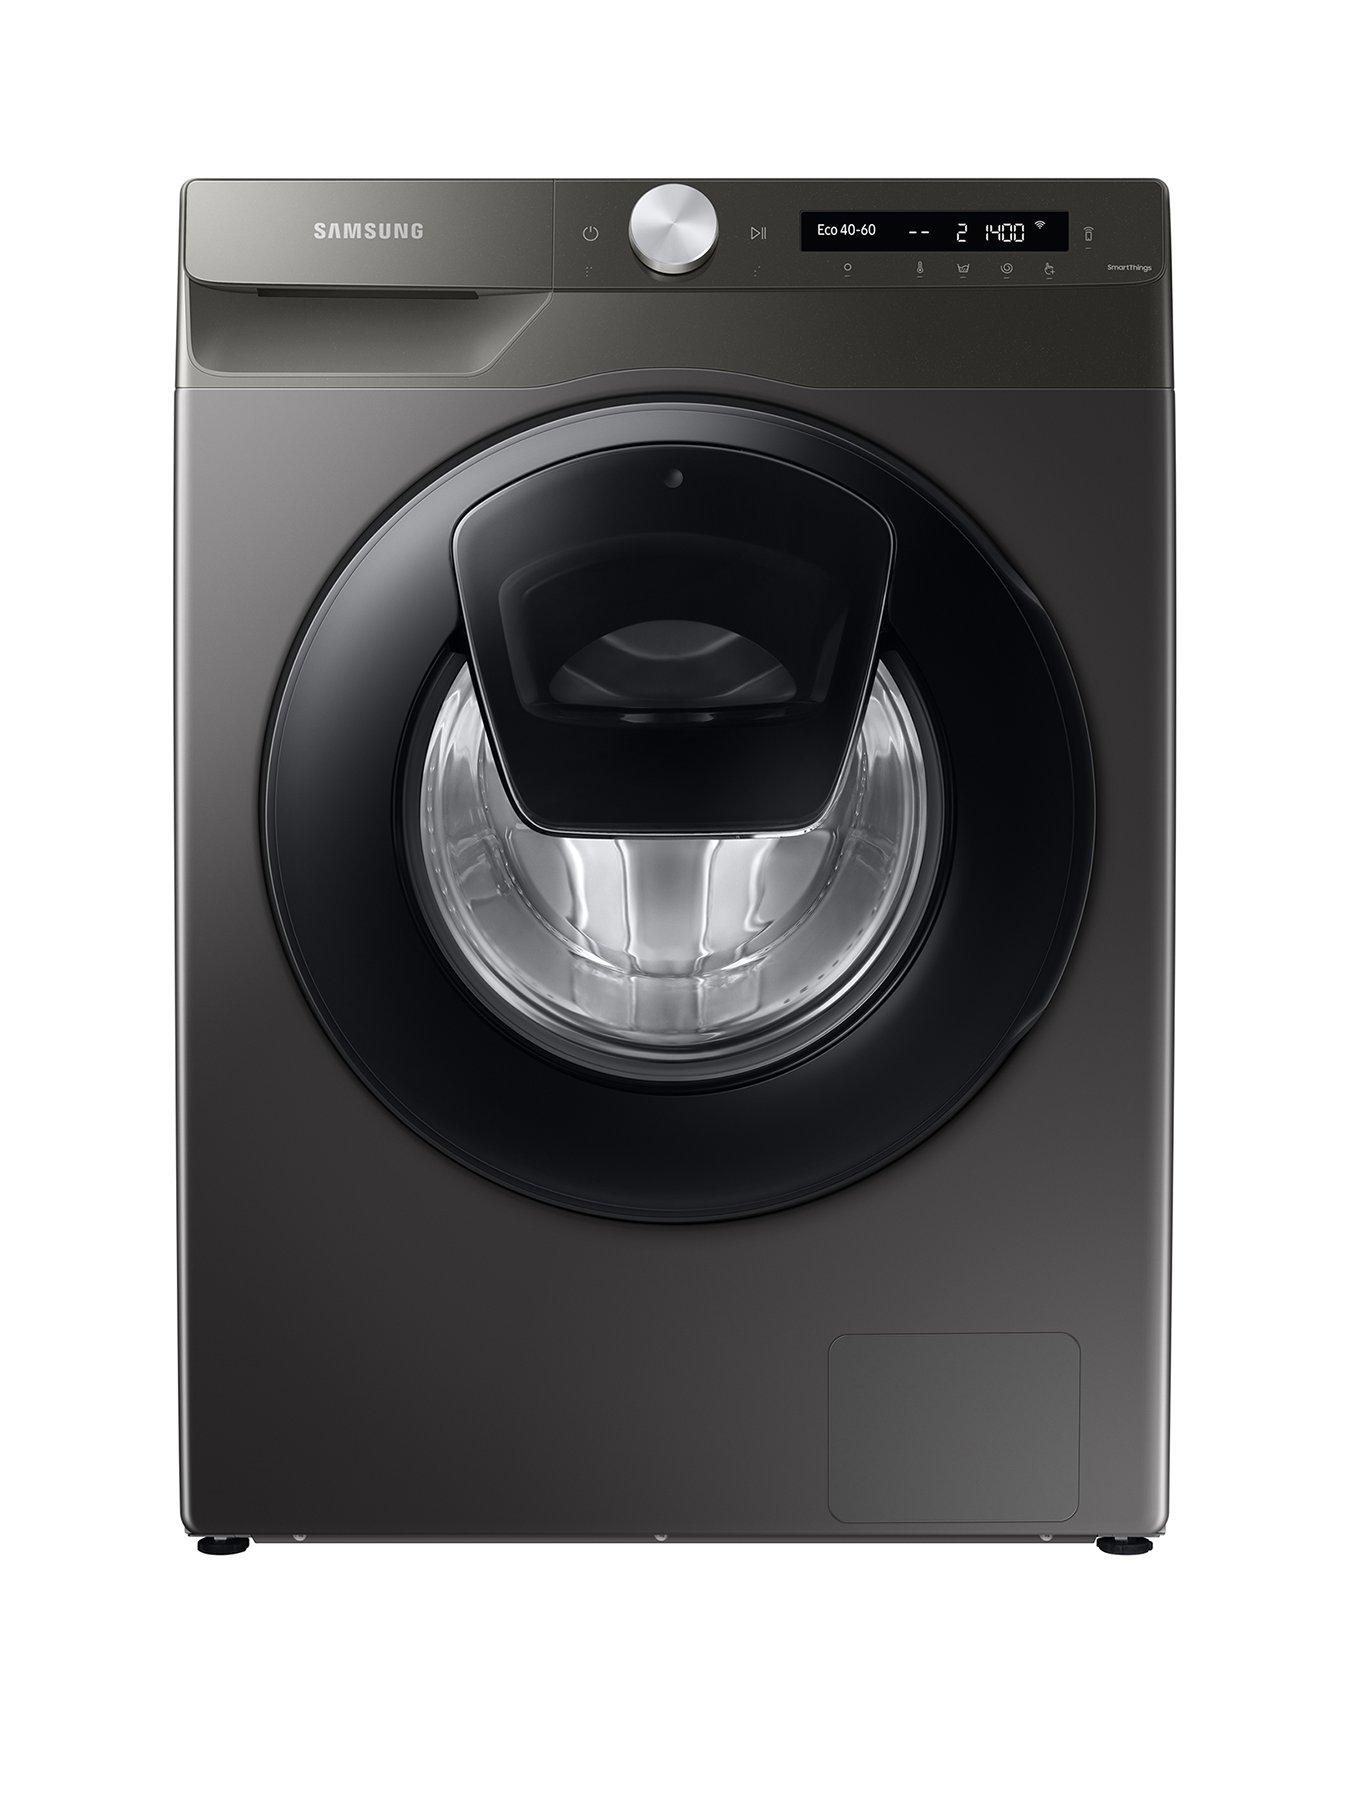 Samsung Series 5 Ww90T554DanS1 AddwashTrade Washing Machine - 9Kg Load 1400Rpm Spin A Rated - Graphite